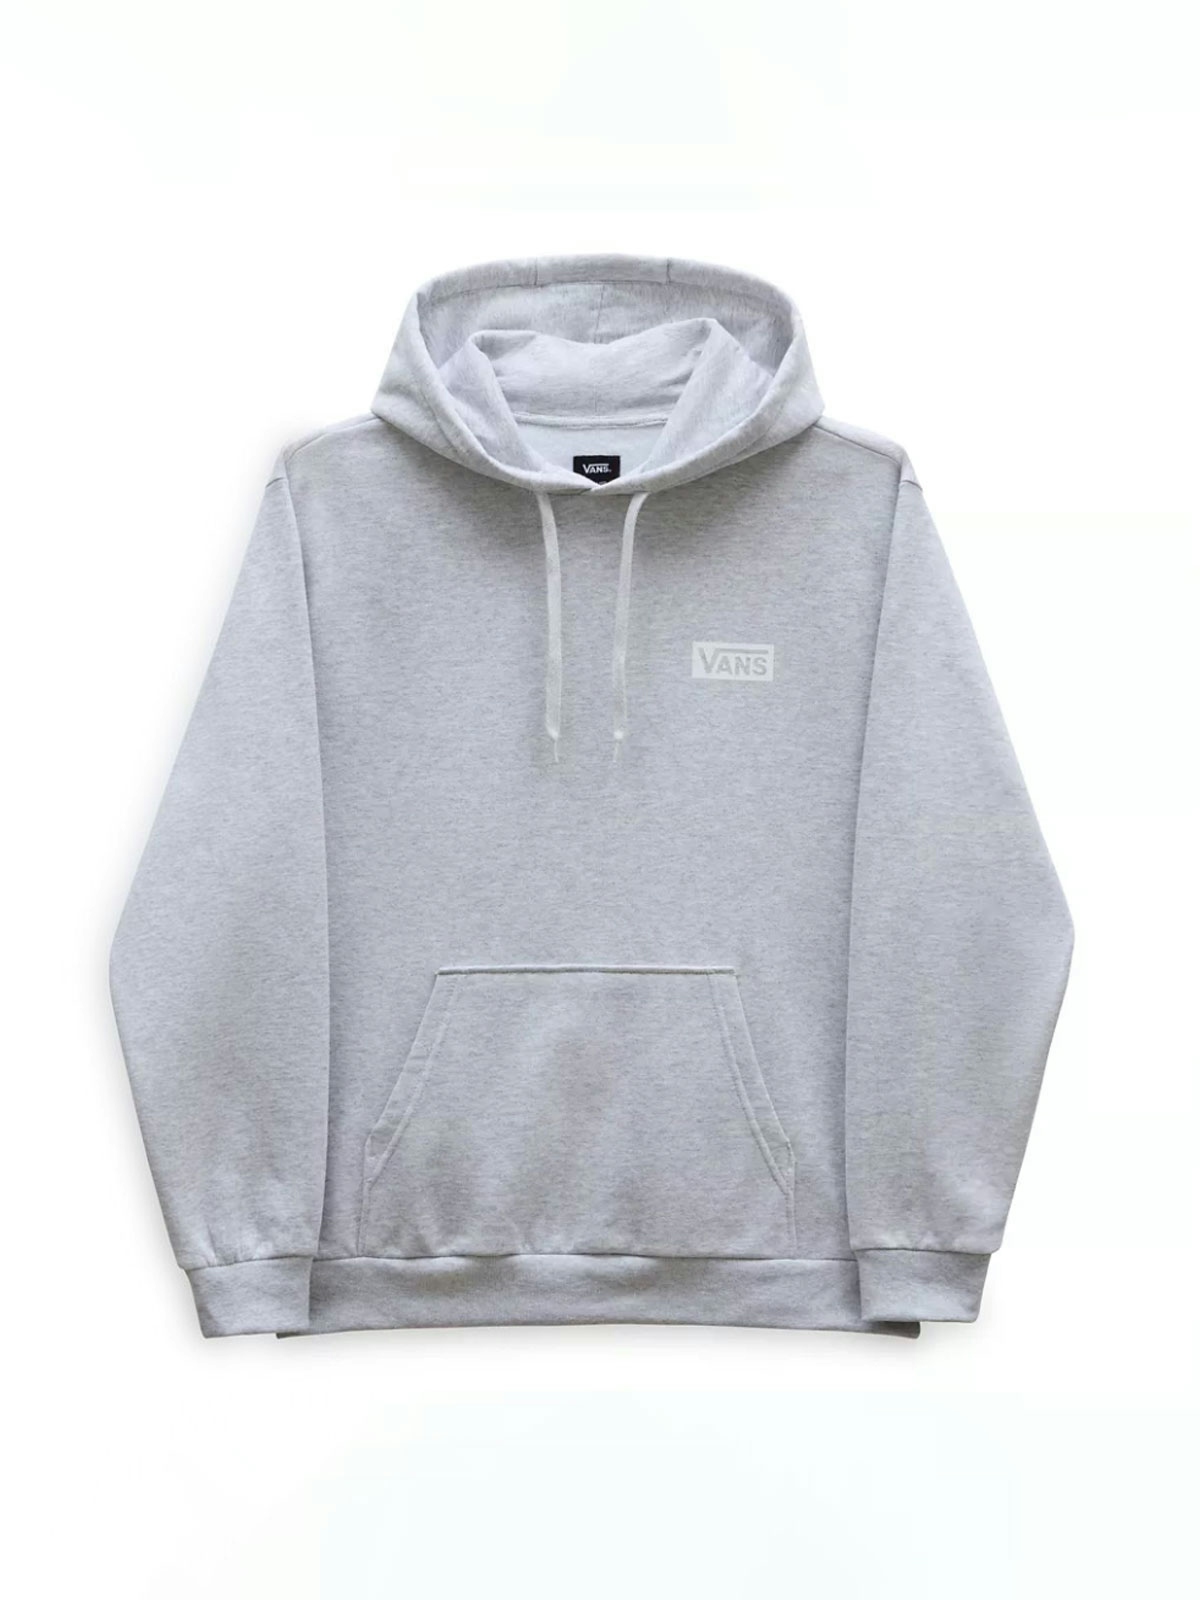 Vans Relaxed Fit Hoodie Light Grey Heather 1